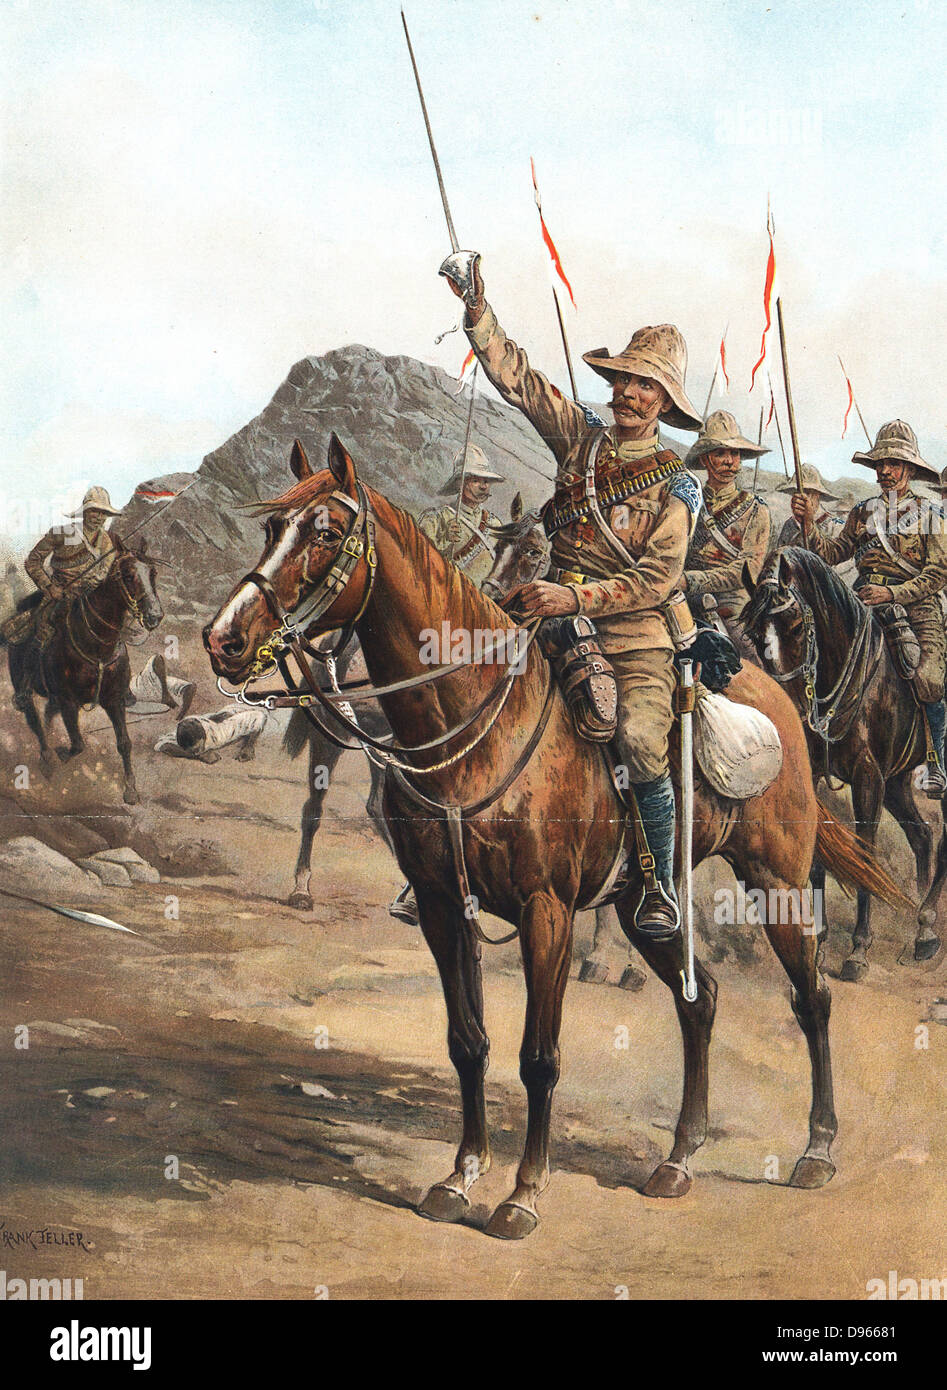 Form Up, No. 2! Form Up!' Rallying cry of Sergeant-Major Veysey after the harge of 21st Lancers at Omdurman, 2 September 1898. British under Kitchener defeated 'Abd Allah (al-Kalifah). Sudan. Chromolithograph. Stock Photo